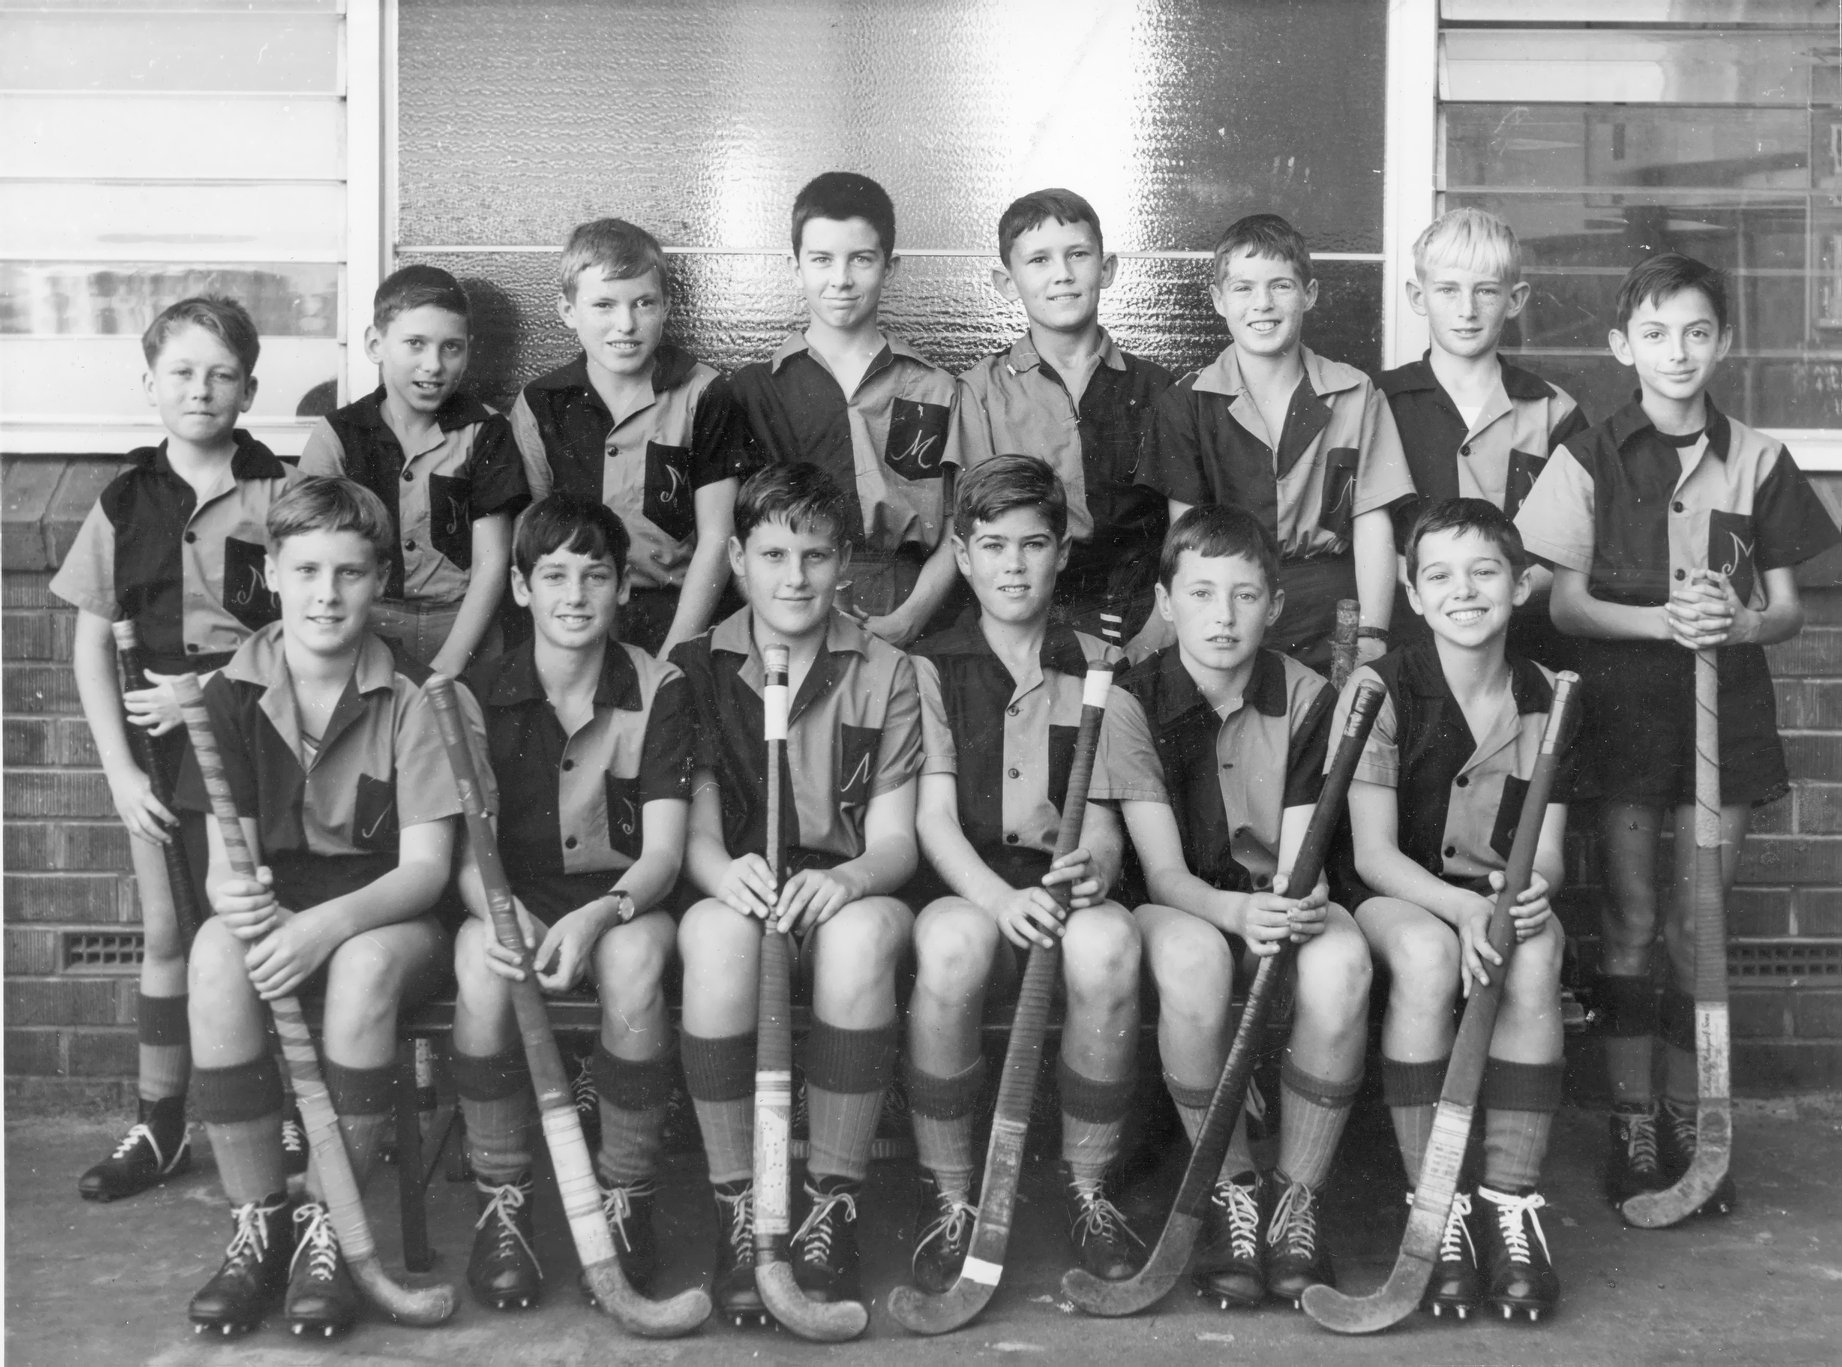  Marist Junior College Hockey Team, c1965 Back, L-R: Maurice Carruthers, unknown, Ron Loughlin, Frank Hubble, Phillip Storey, Mick Brennan, Steve Jones, John Commuskey Front: Peter Brophy, Laurie Healy, Michael Brophy, Bret O'Mahony, Steve Hickey, Pa